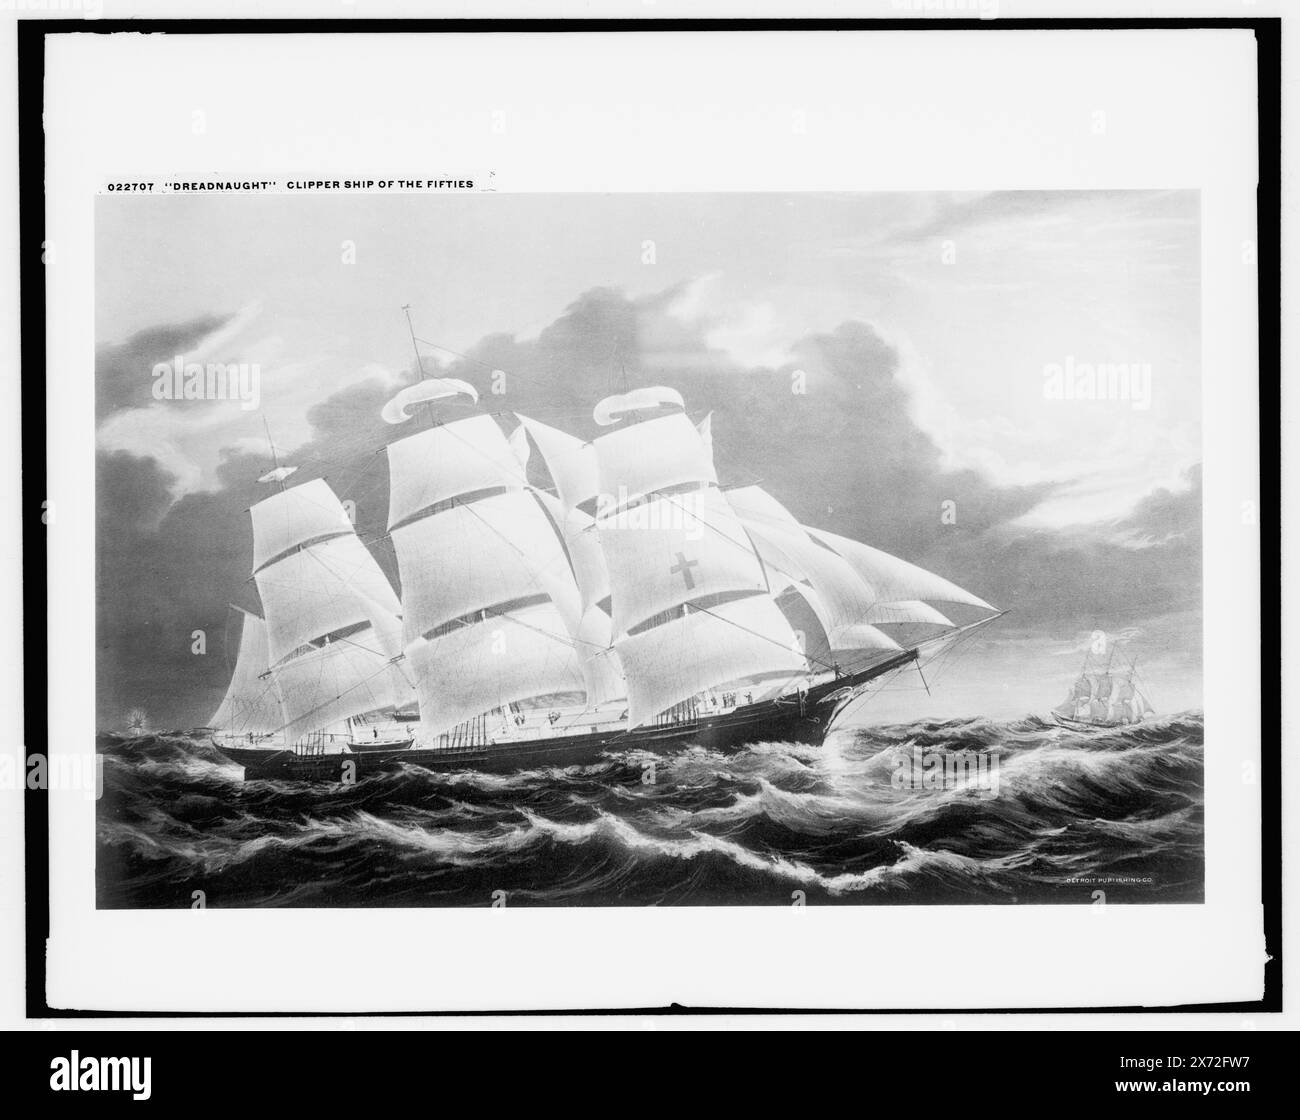 Dreadnaught, clippership of the fifties, Photograph of a print., Detroit Publishing Co. no. 022707., Gift; State Historical Society of Colorado; 1949,  Dreadnaught (Packet-ship) , Clipper ships. Stock Photo